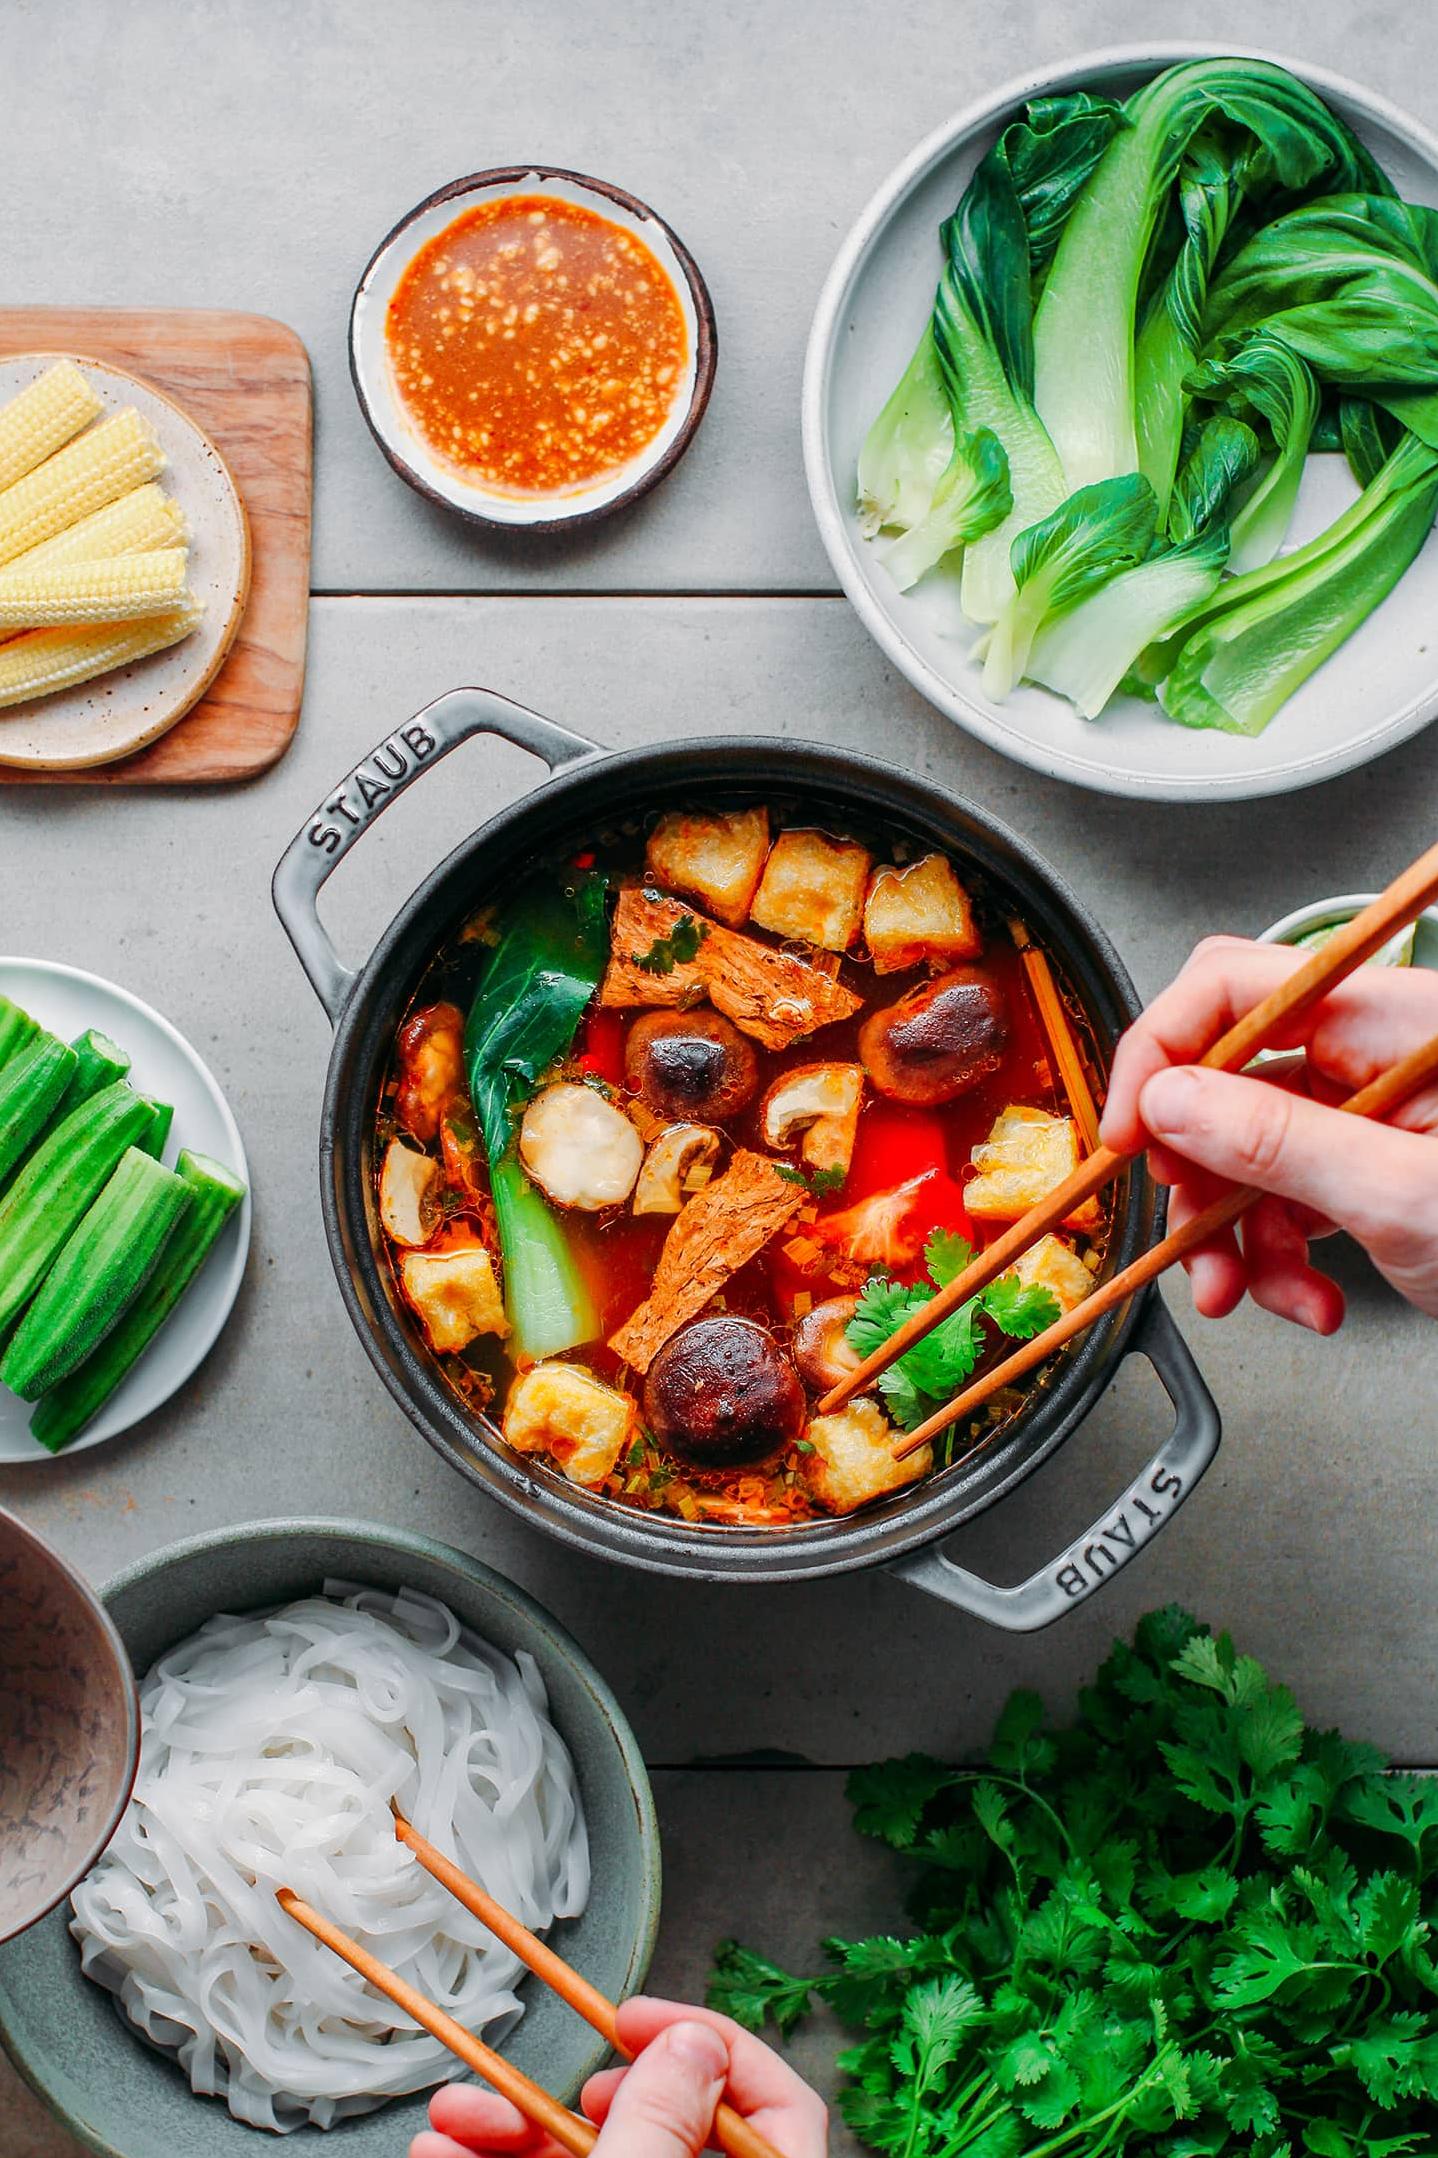  Let the veggies do the talking in this colorful and hearty hot pot